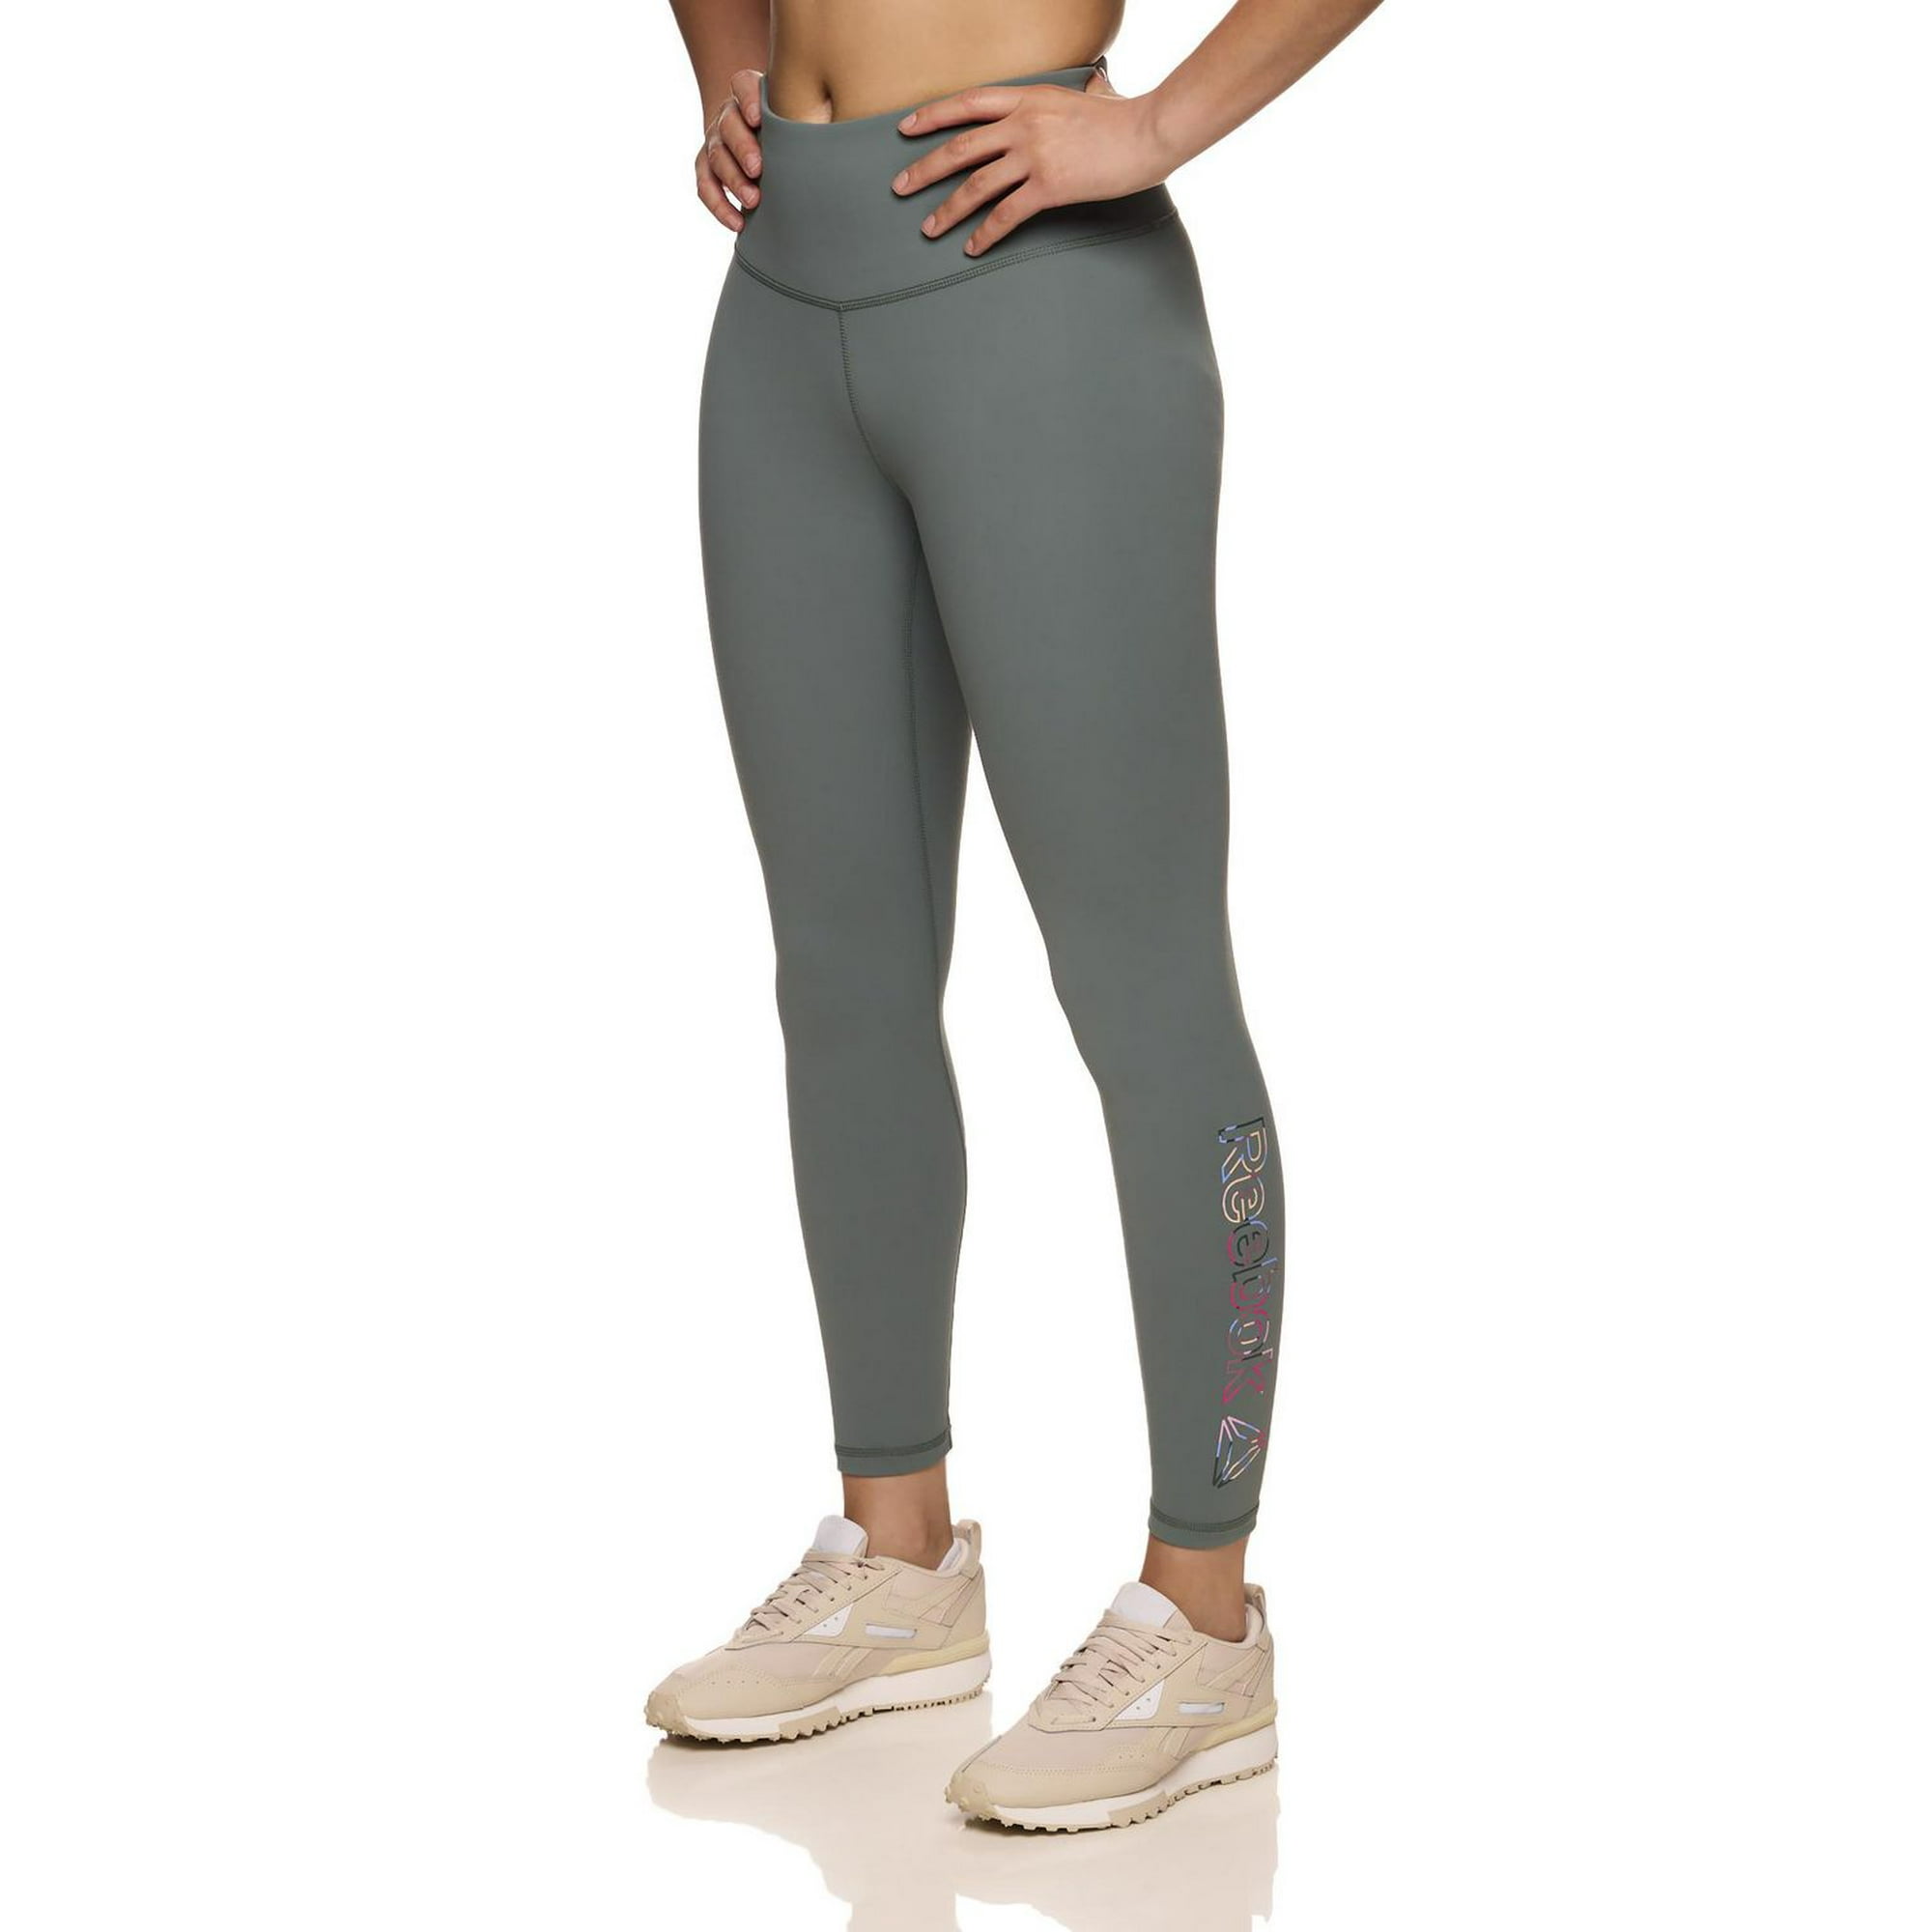 Reebok Women's Activate Highrise 7/8 Leggings with Invisible